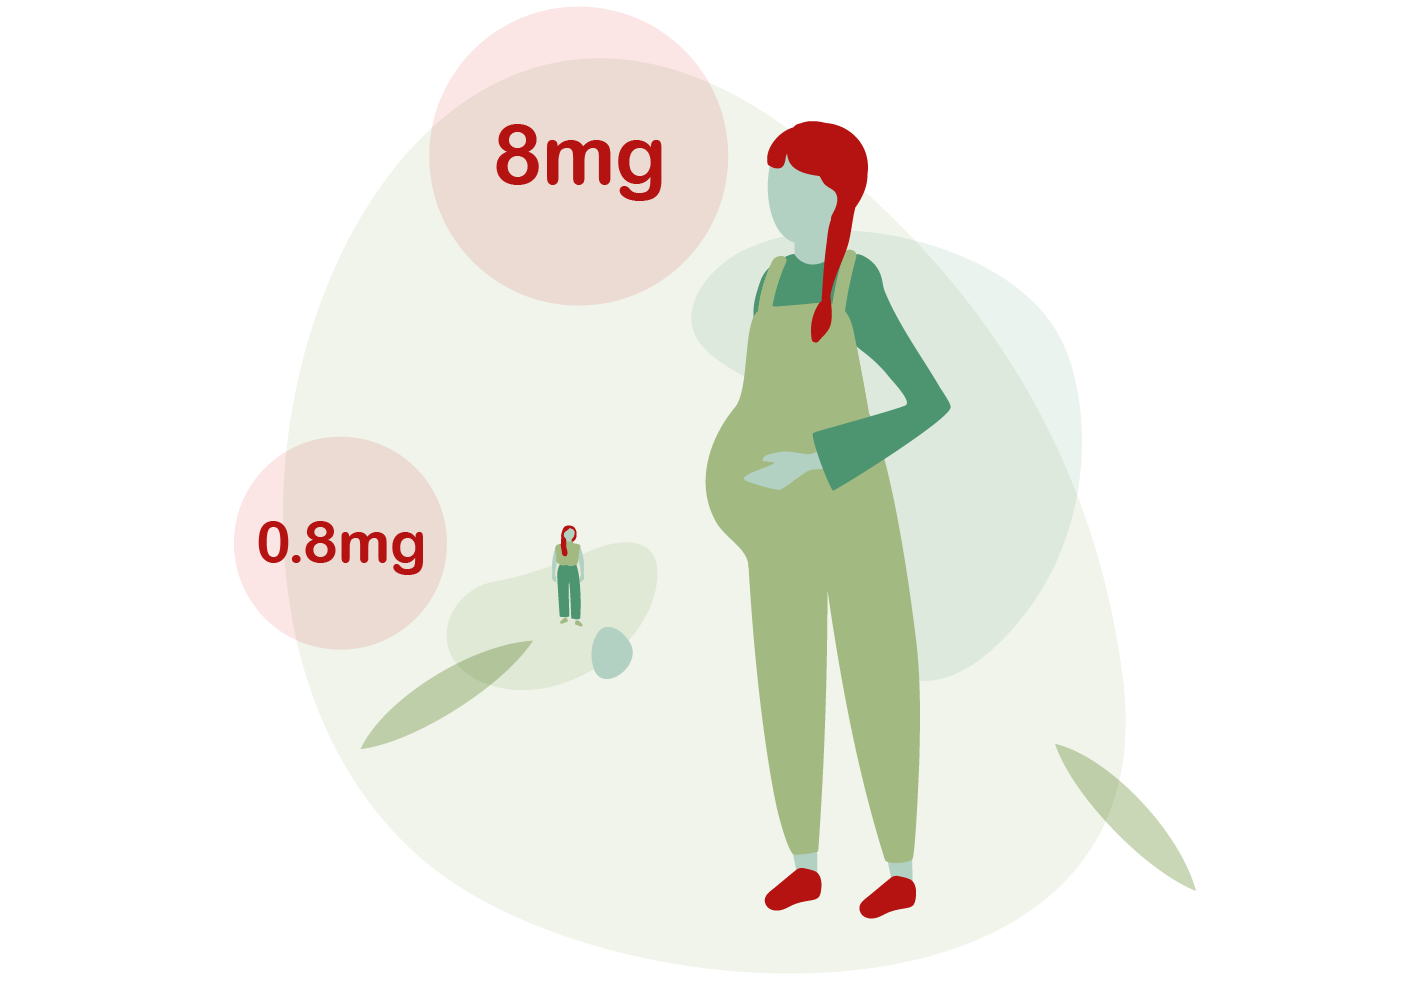 Women who aren't pregnant need 0.8mg iron a day, women who are pregnant need 8mg iron a day